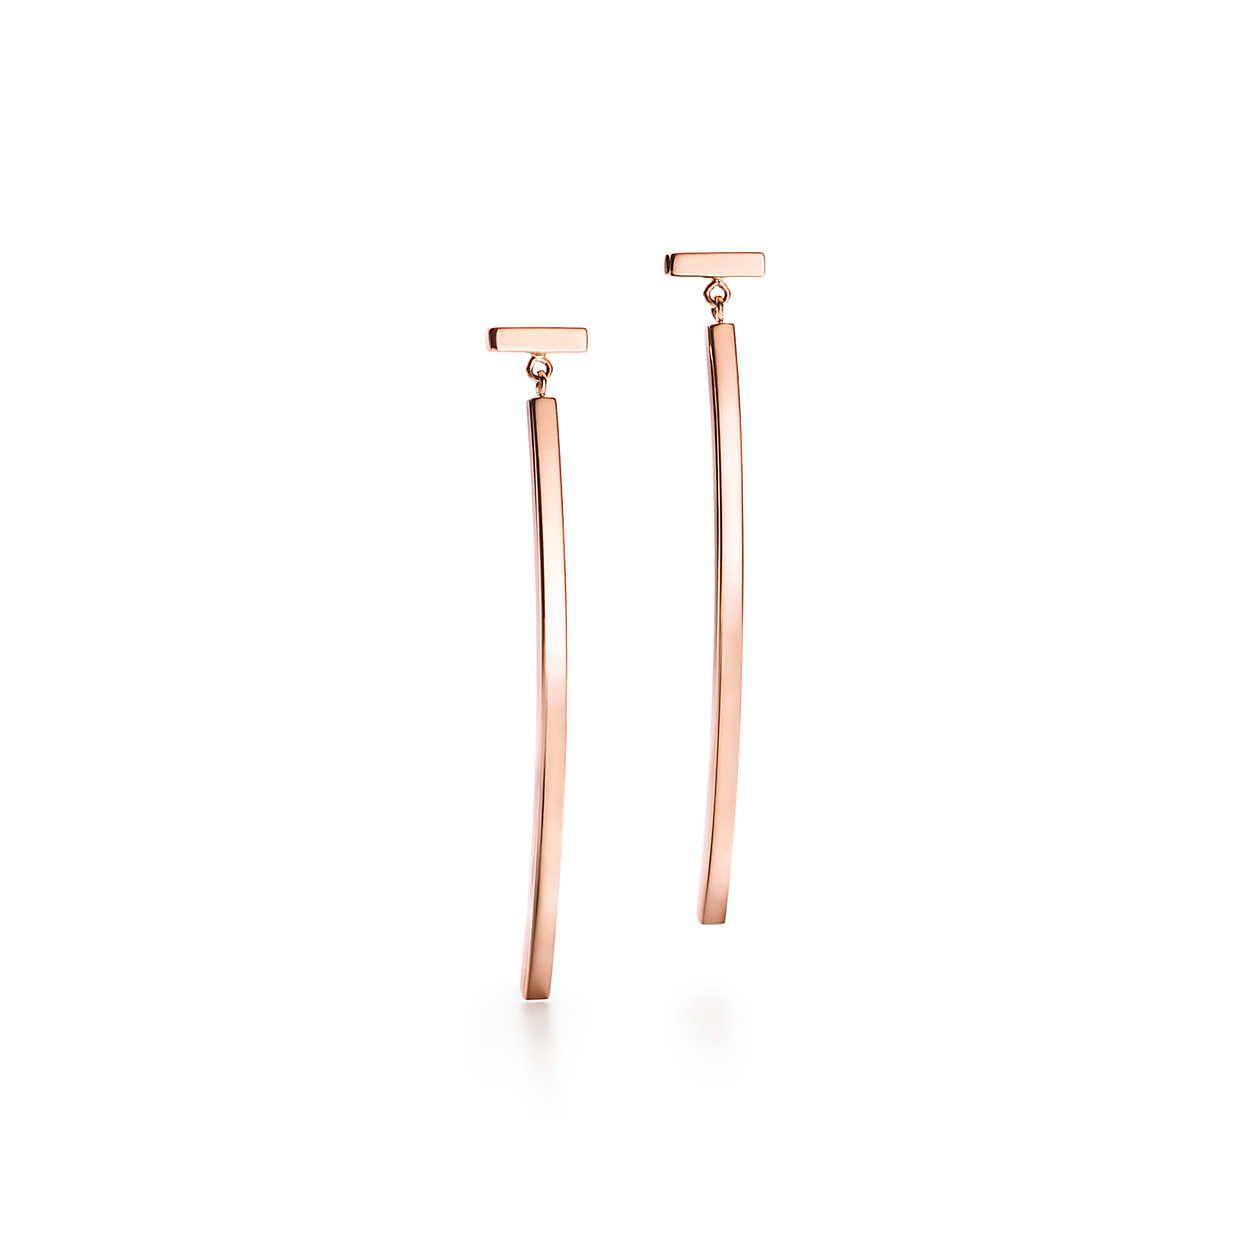 Tiffany and Co Logo - Tiffany T wire bar earrings in 18ct rose gold. Tiffany & Co